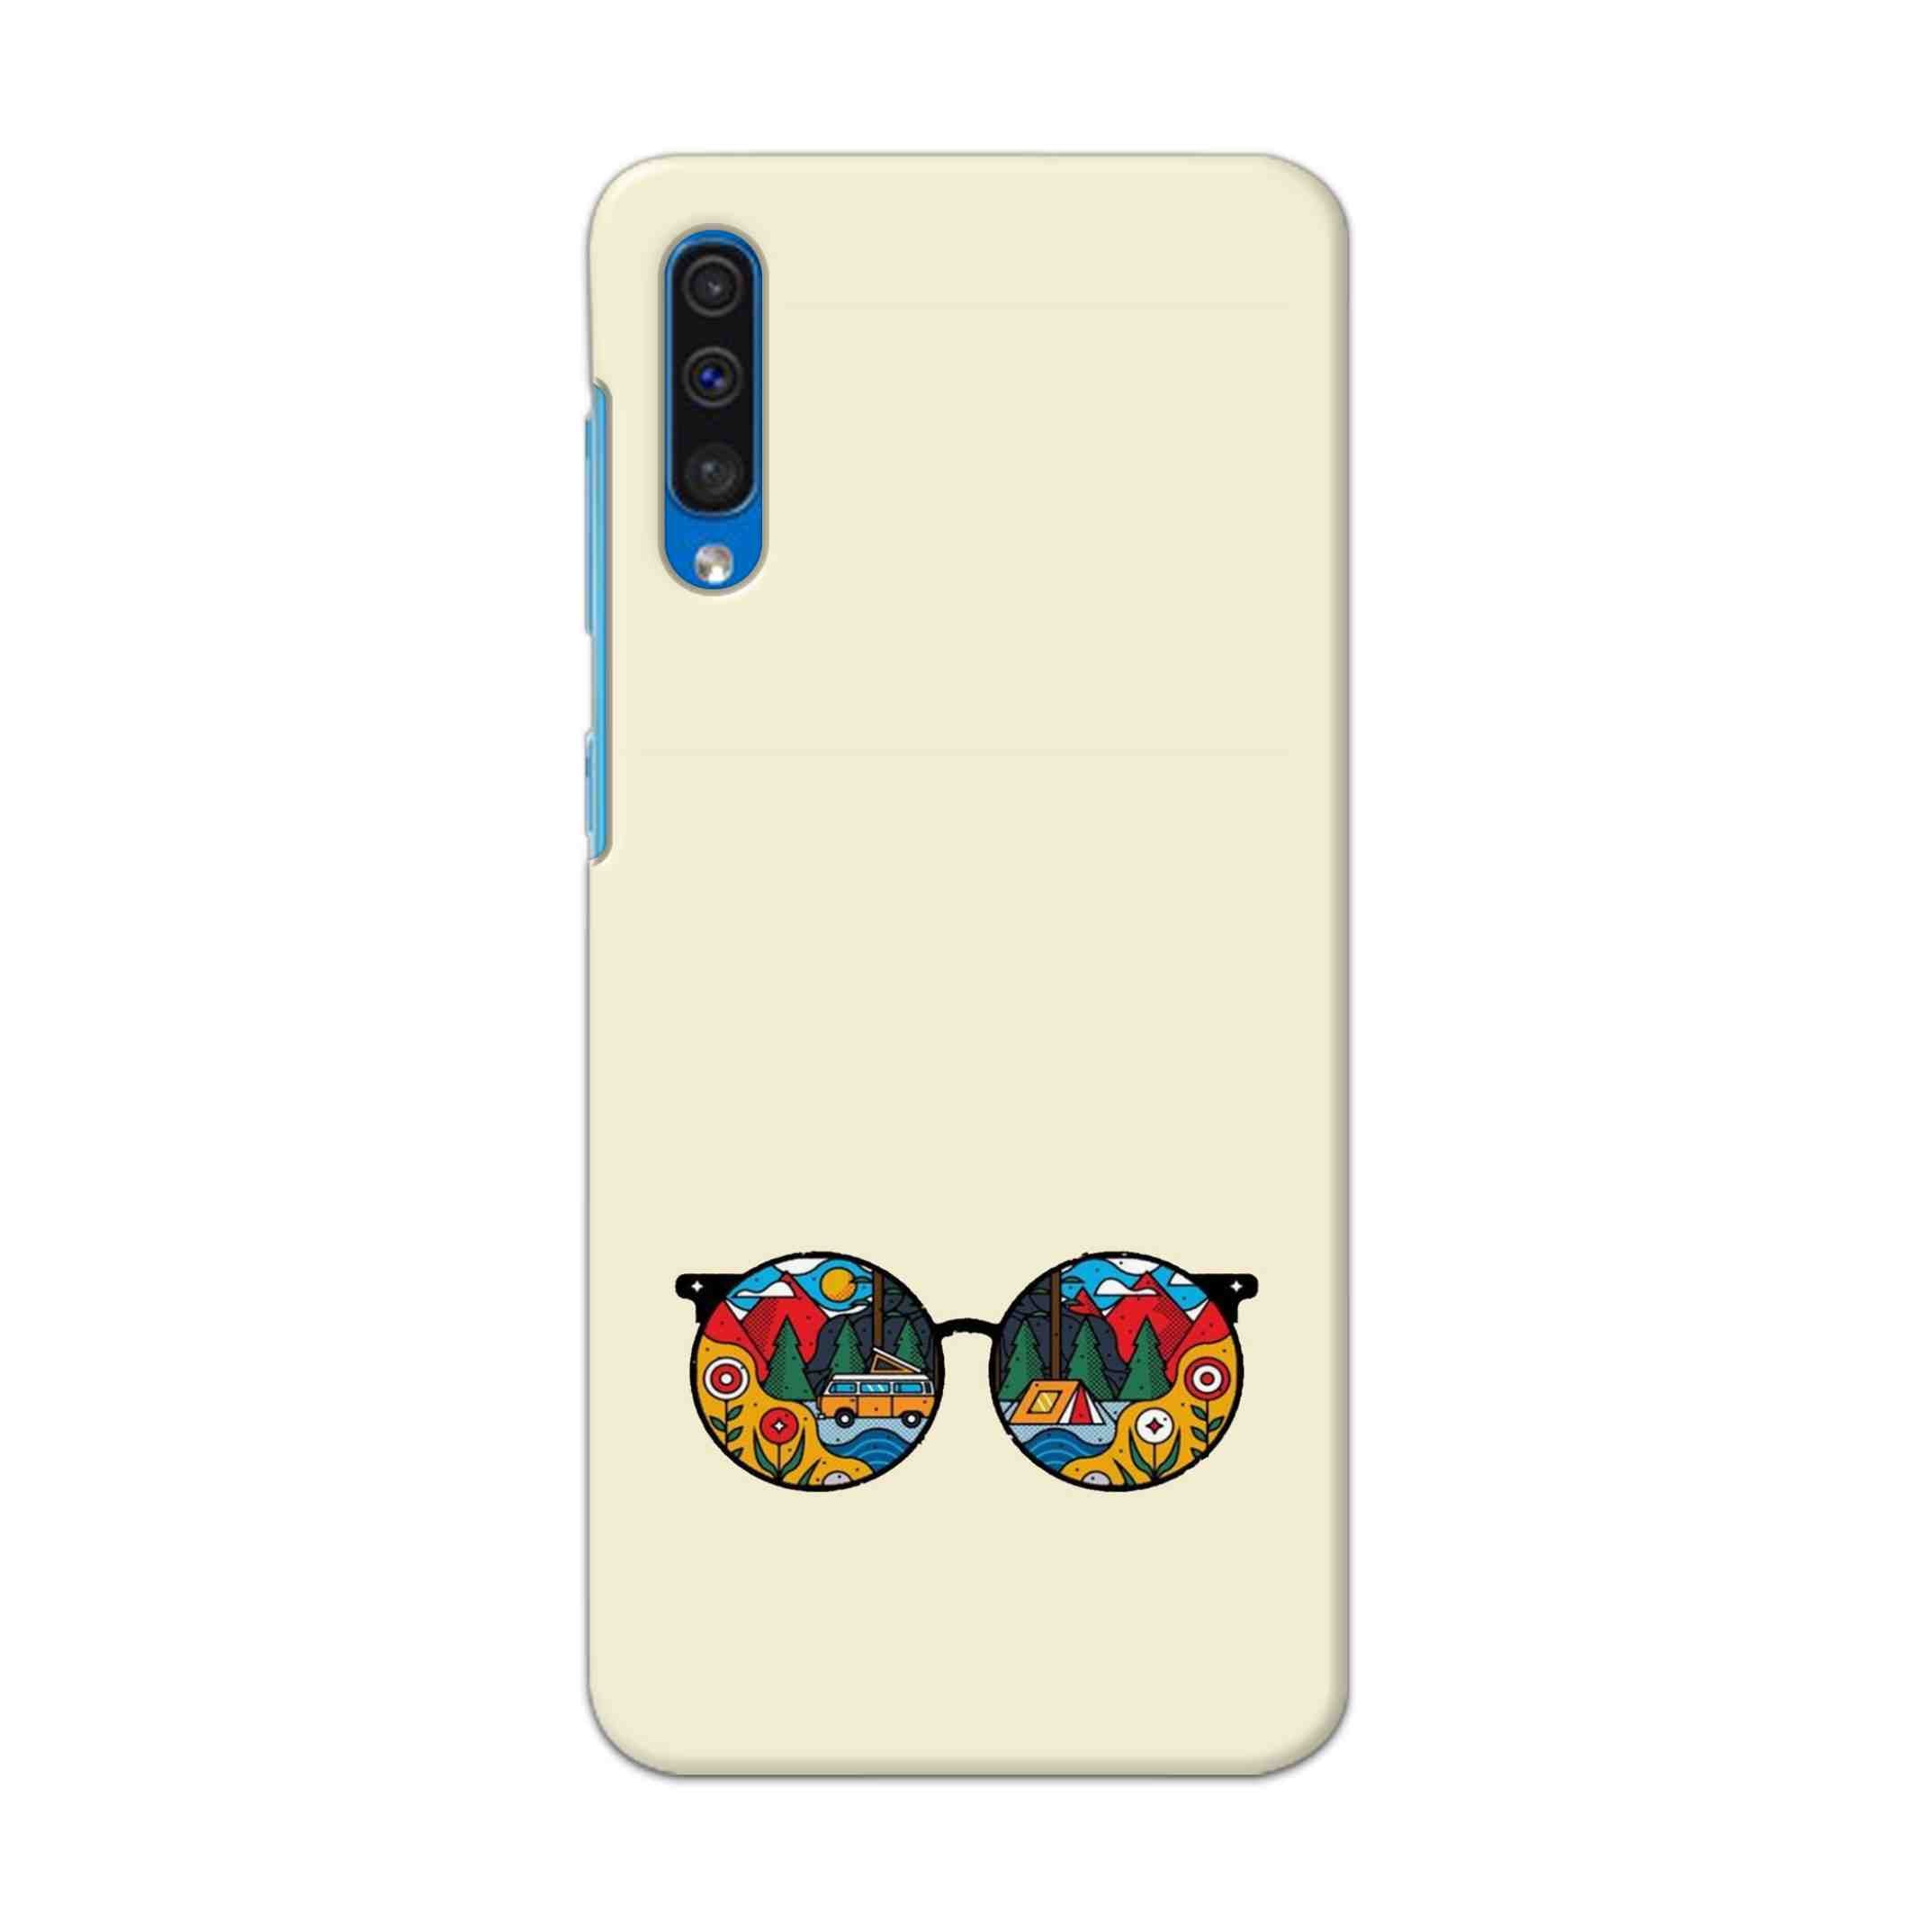 Buy Rainbow Sunglasses Hard Back Mobile Phone Case Cover For Samsung Galaxy A50 / A50s / A30s Online